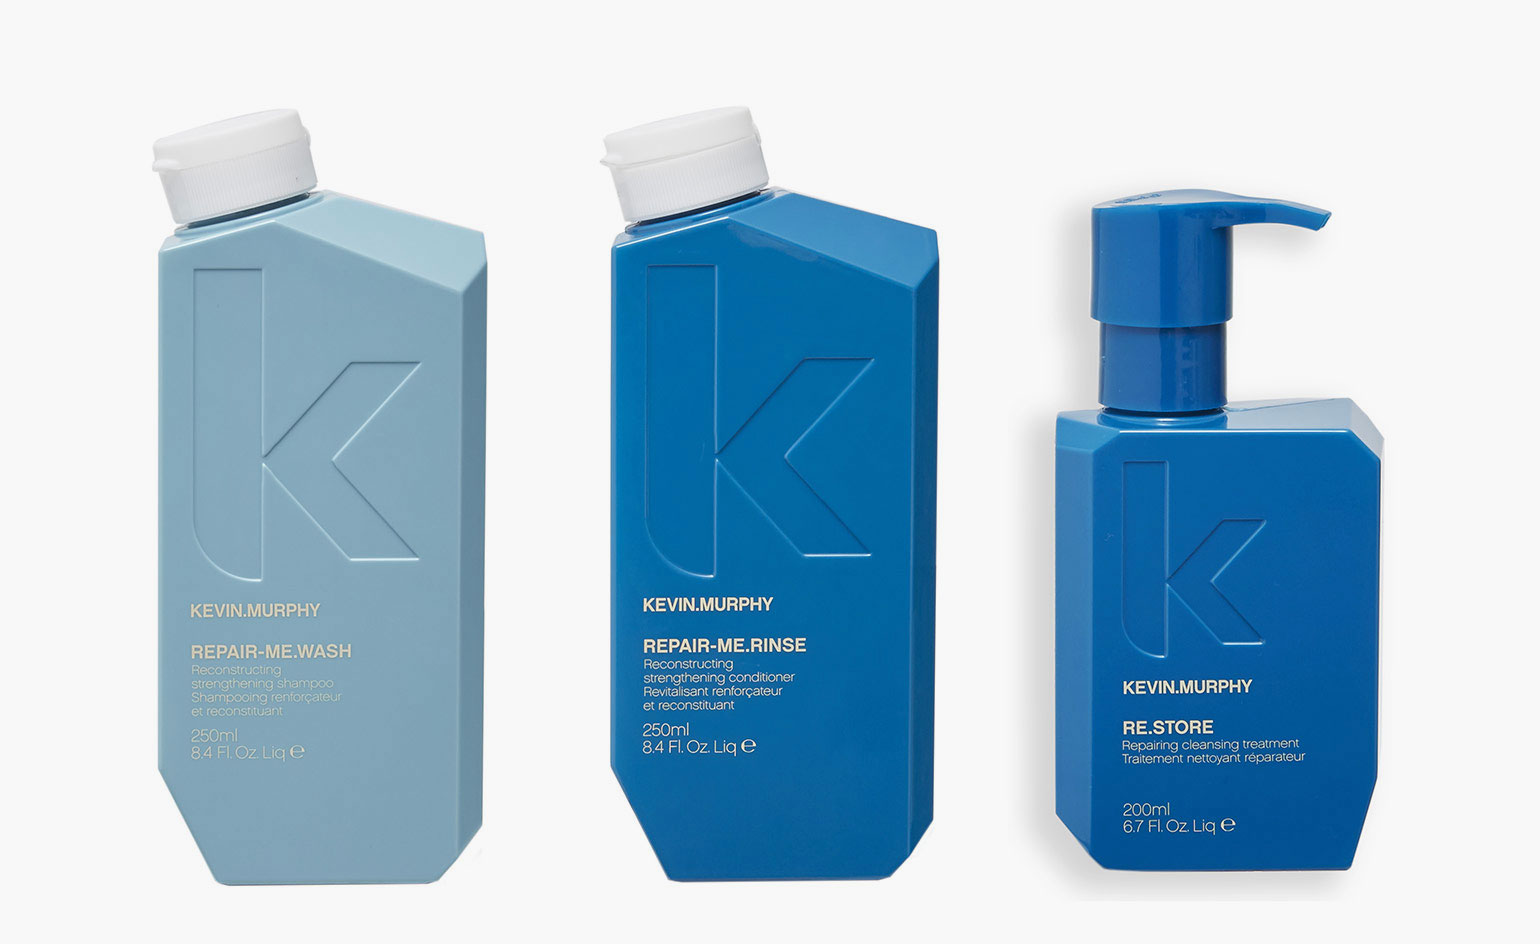  launches new hair care range | Wallpaper